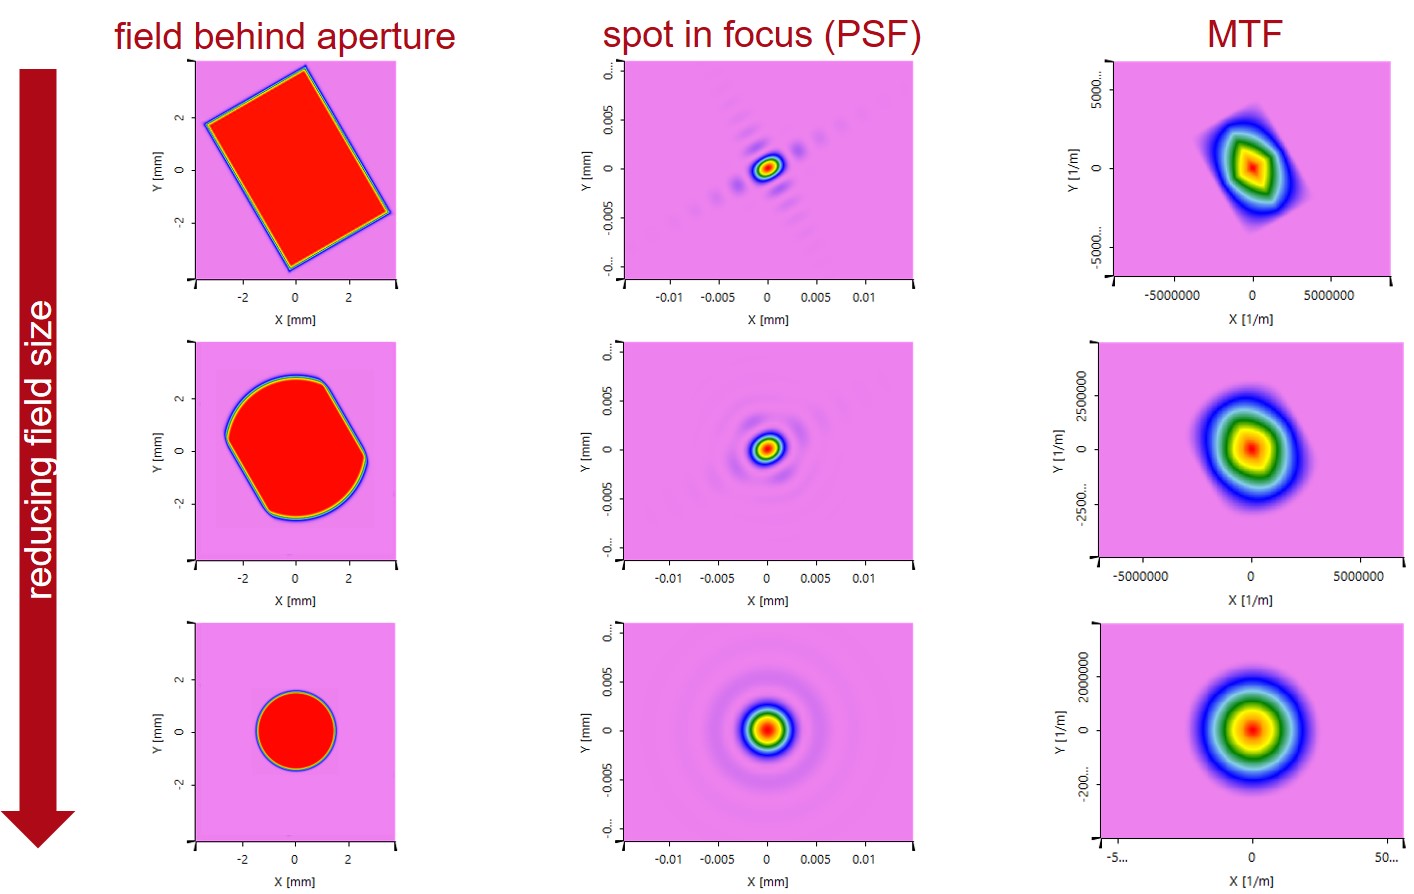 Influence of different apertures on point spread function (PSF) and modulation transfer function (MTF) in focal plane